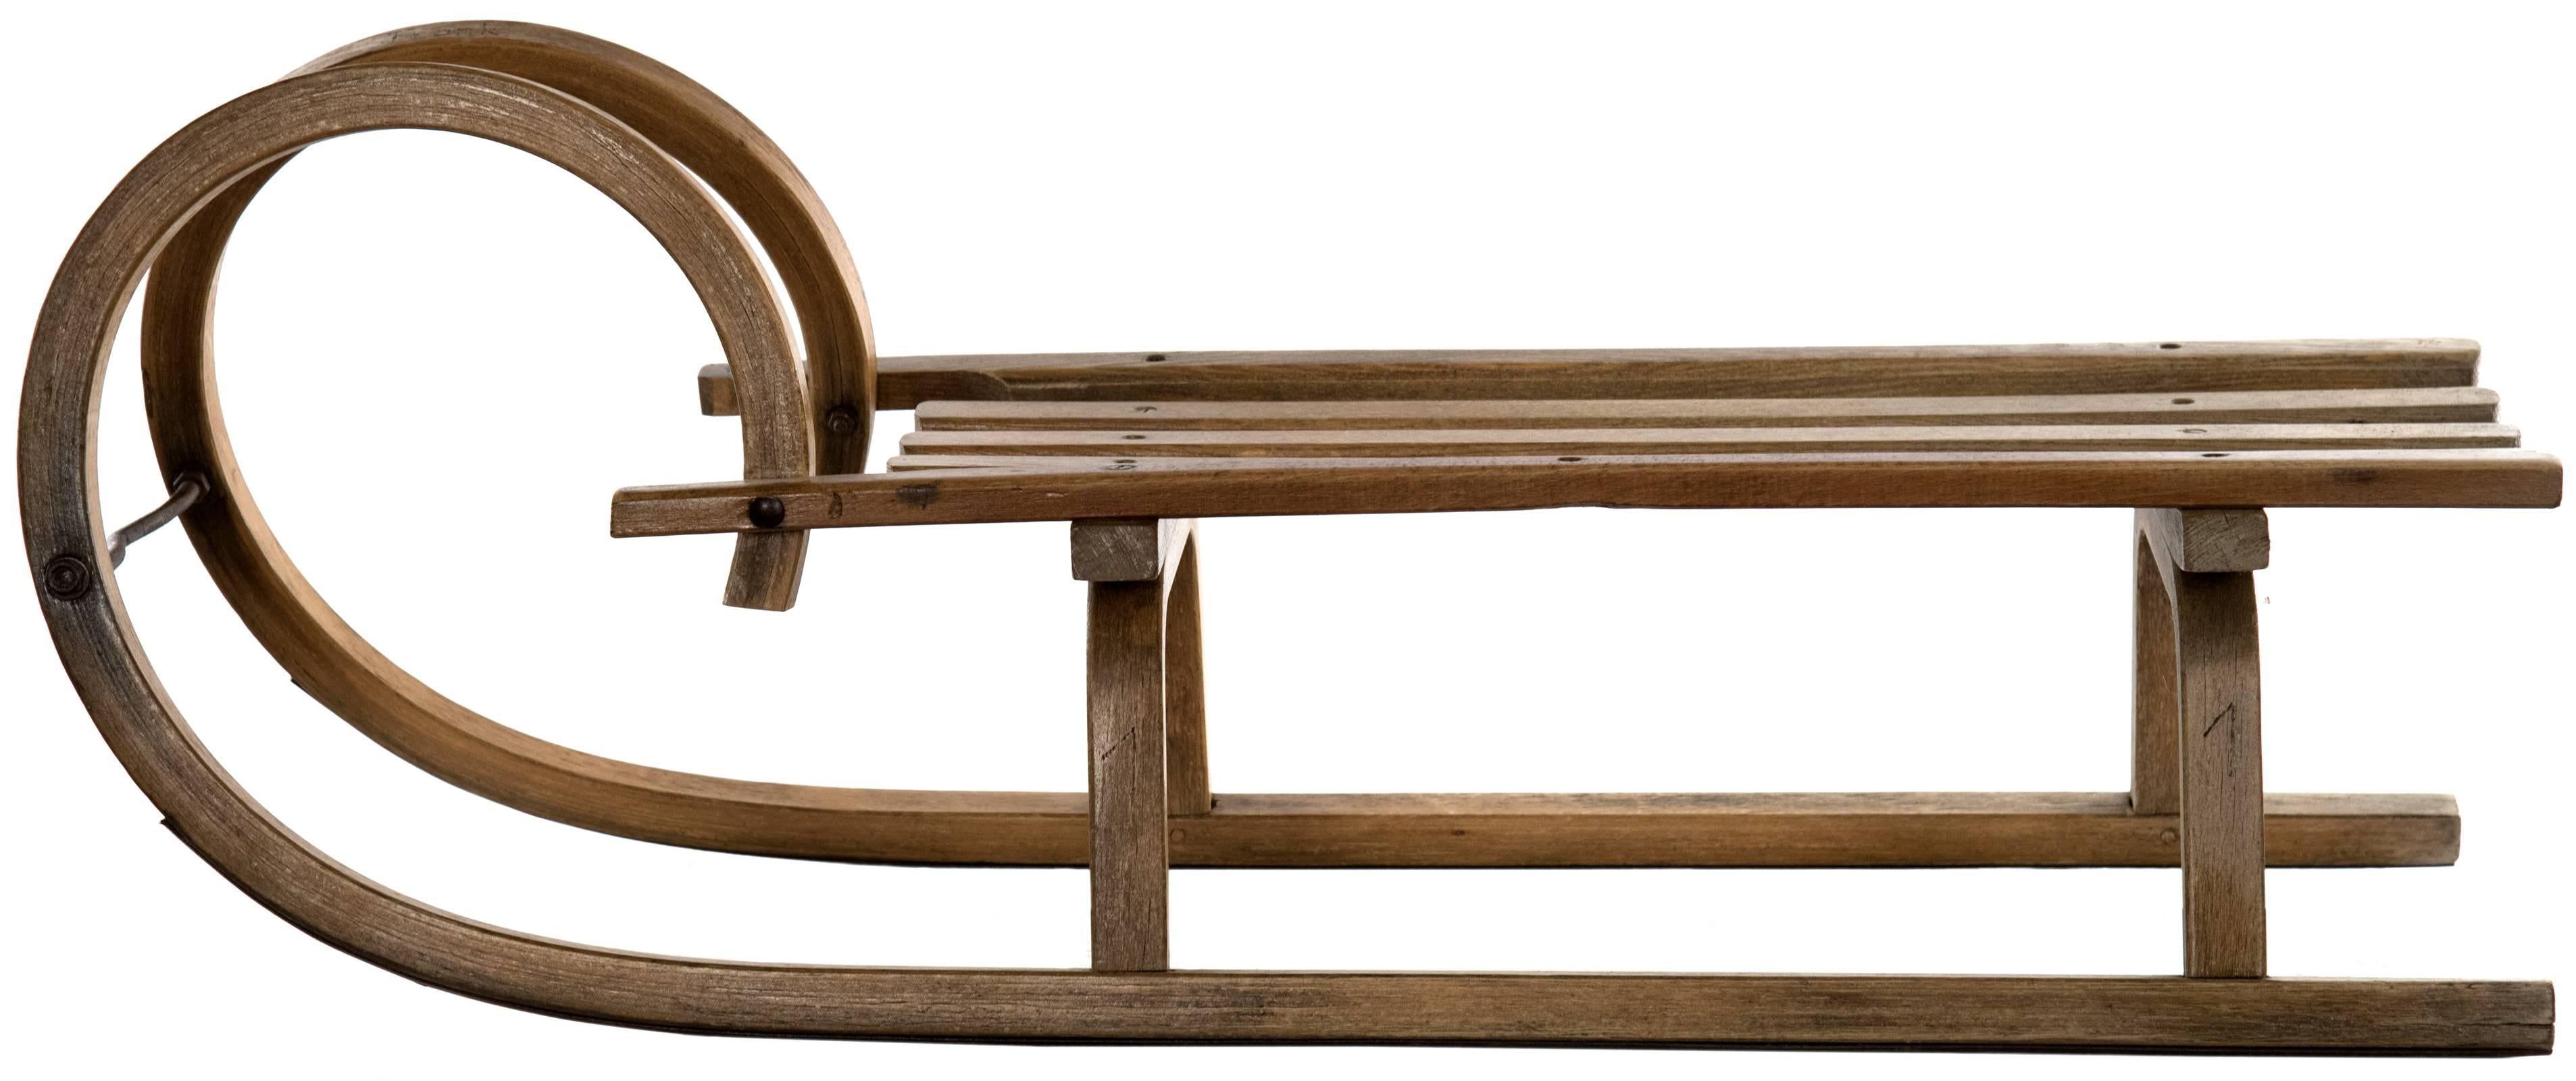 This Classic bentwood design is referred to as a "Grindelwalder", the design originating from the Swiss valley of Grindelwald in the early 1880s. The solid pine construction features three center slates, bentwood brackets, and runners that